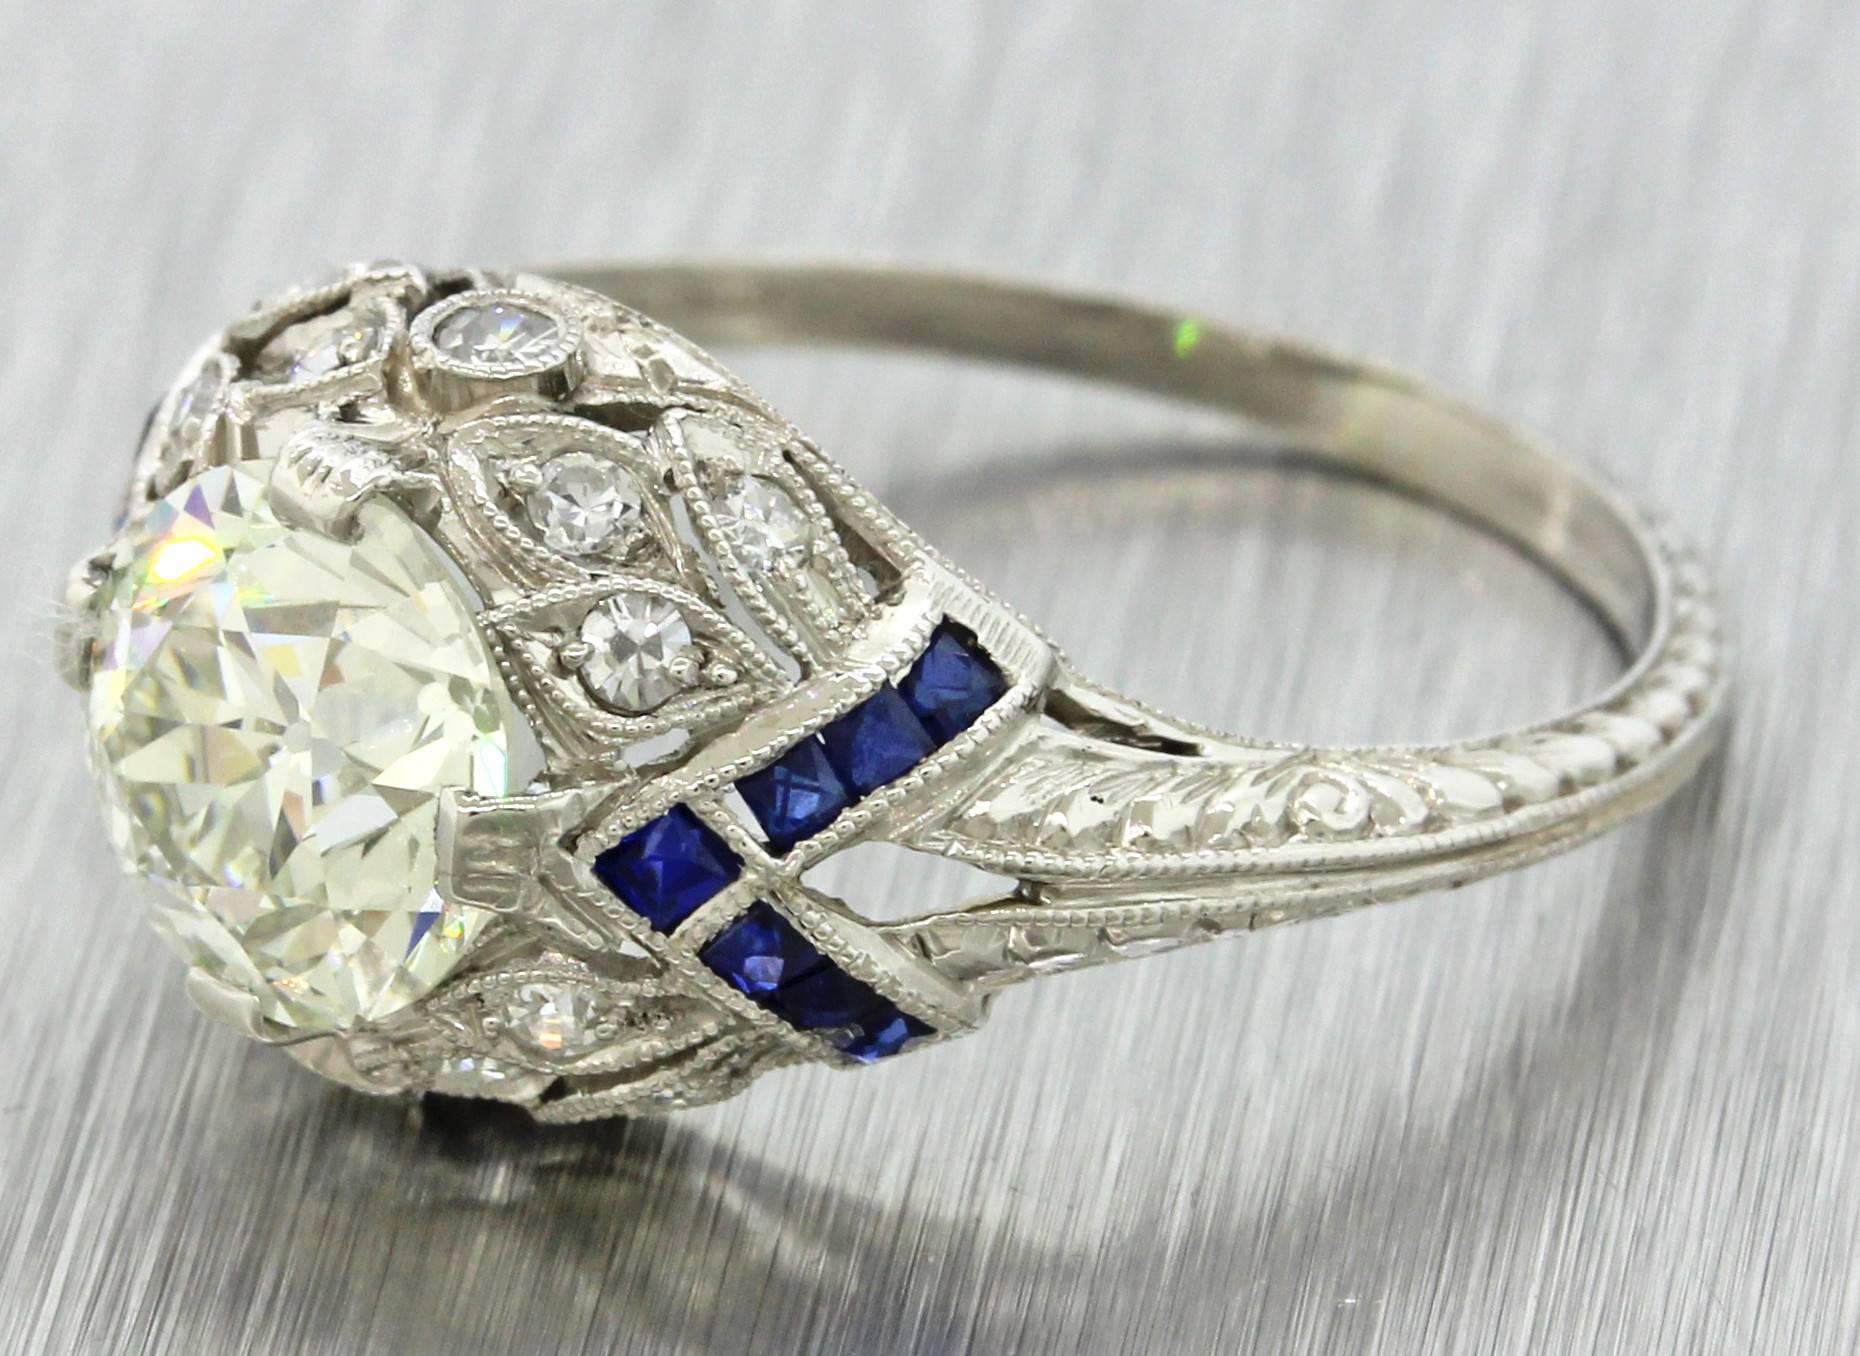 This is an antique Art Deco platinum filigree diamond and sapphire engagement ring that can be dated back to the 1920s. This rings center diamond was graded by world-renowned EGL USA; one of the most reputable diamond grading organizations in the